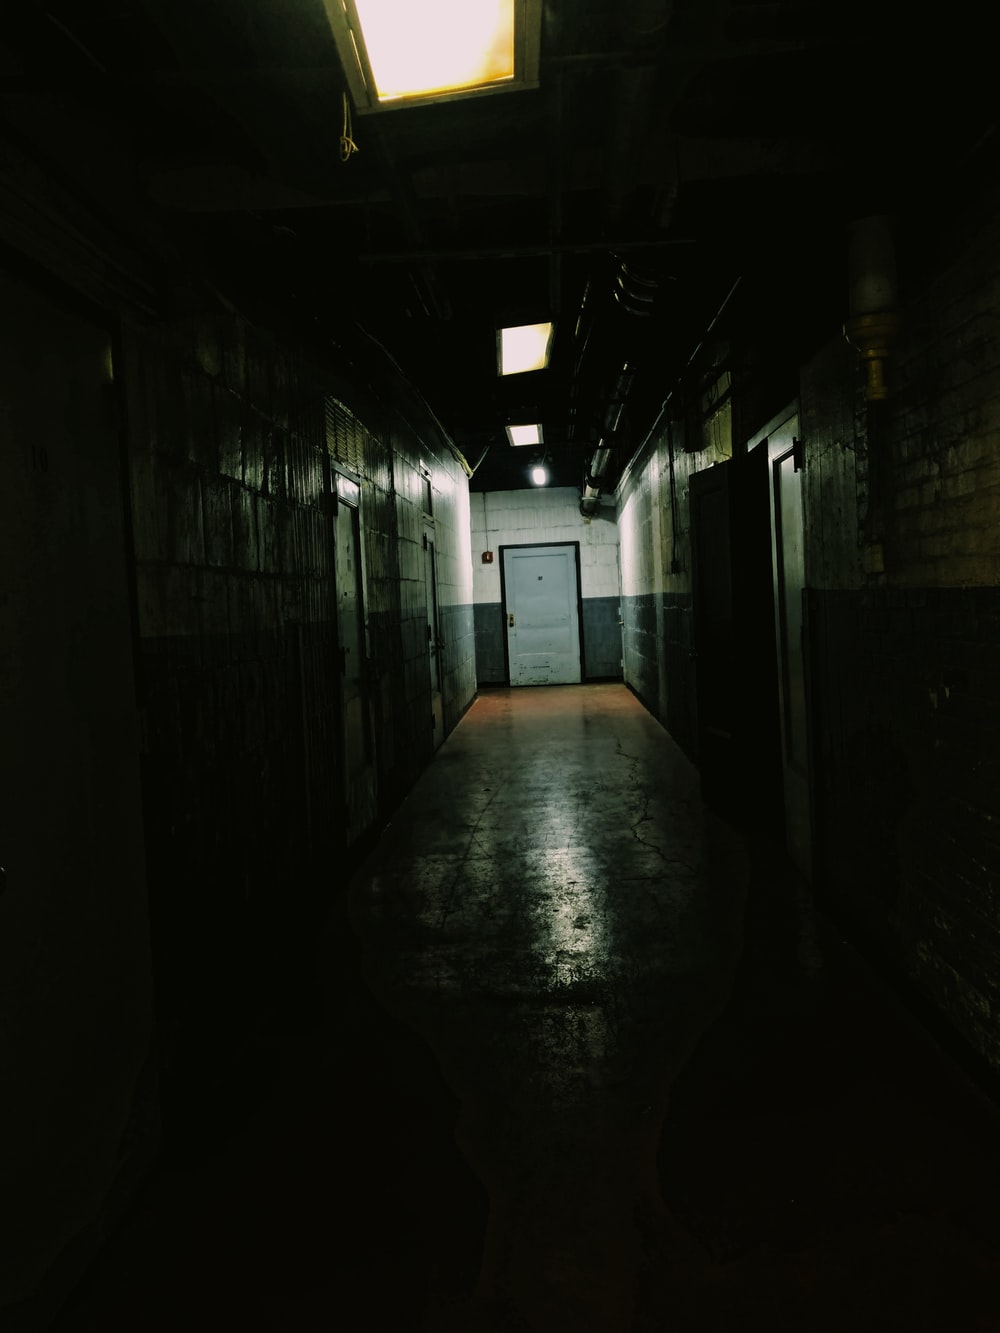 Scary Room Picture. Download Free Image